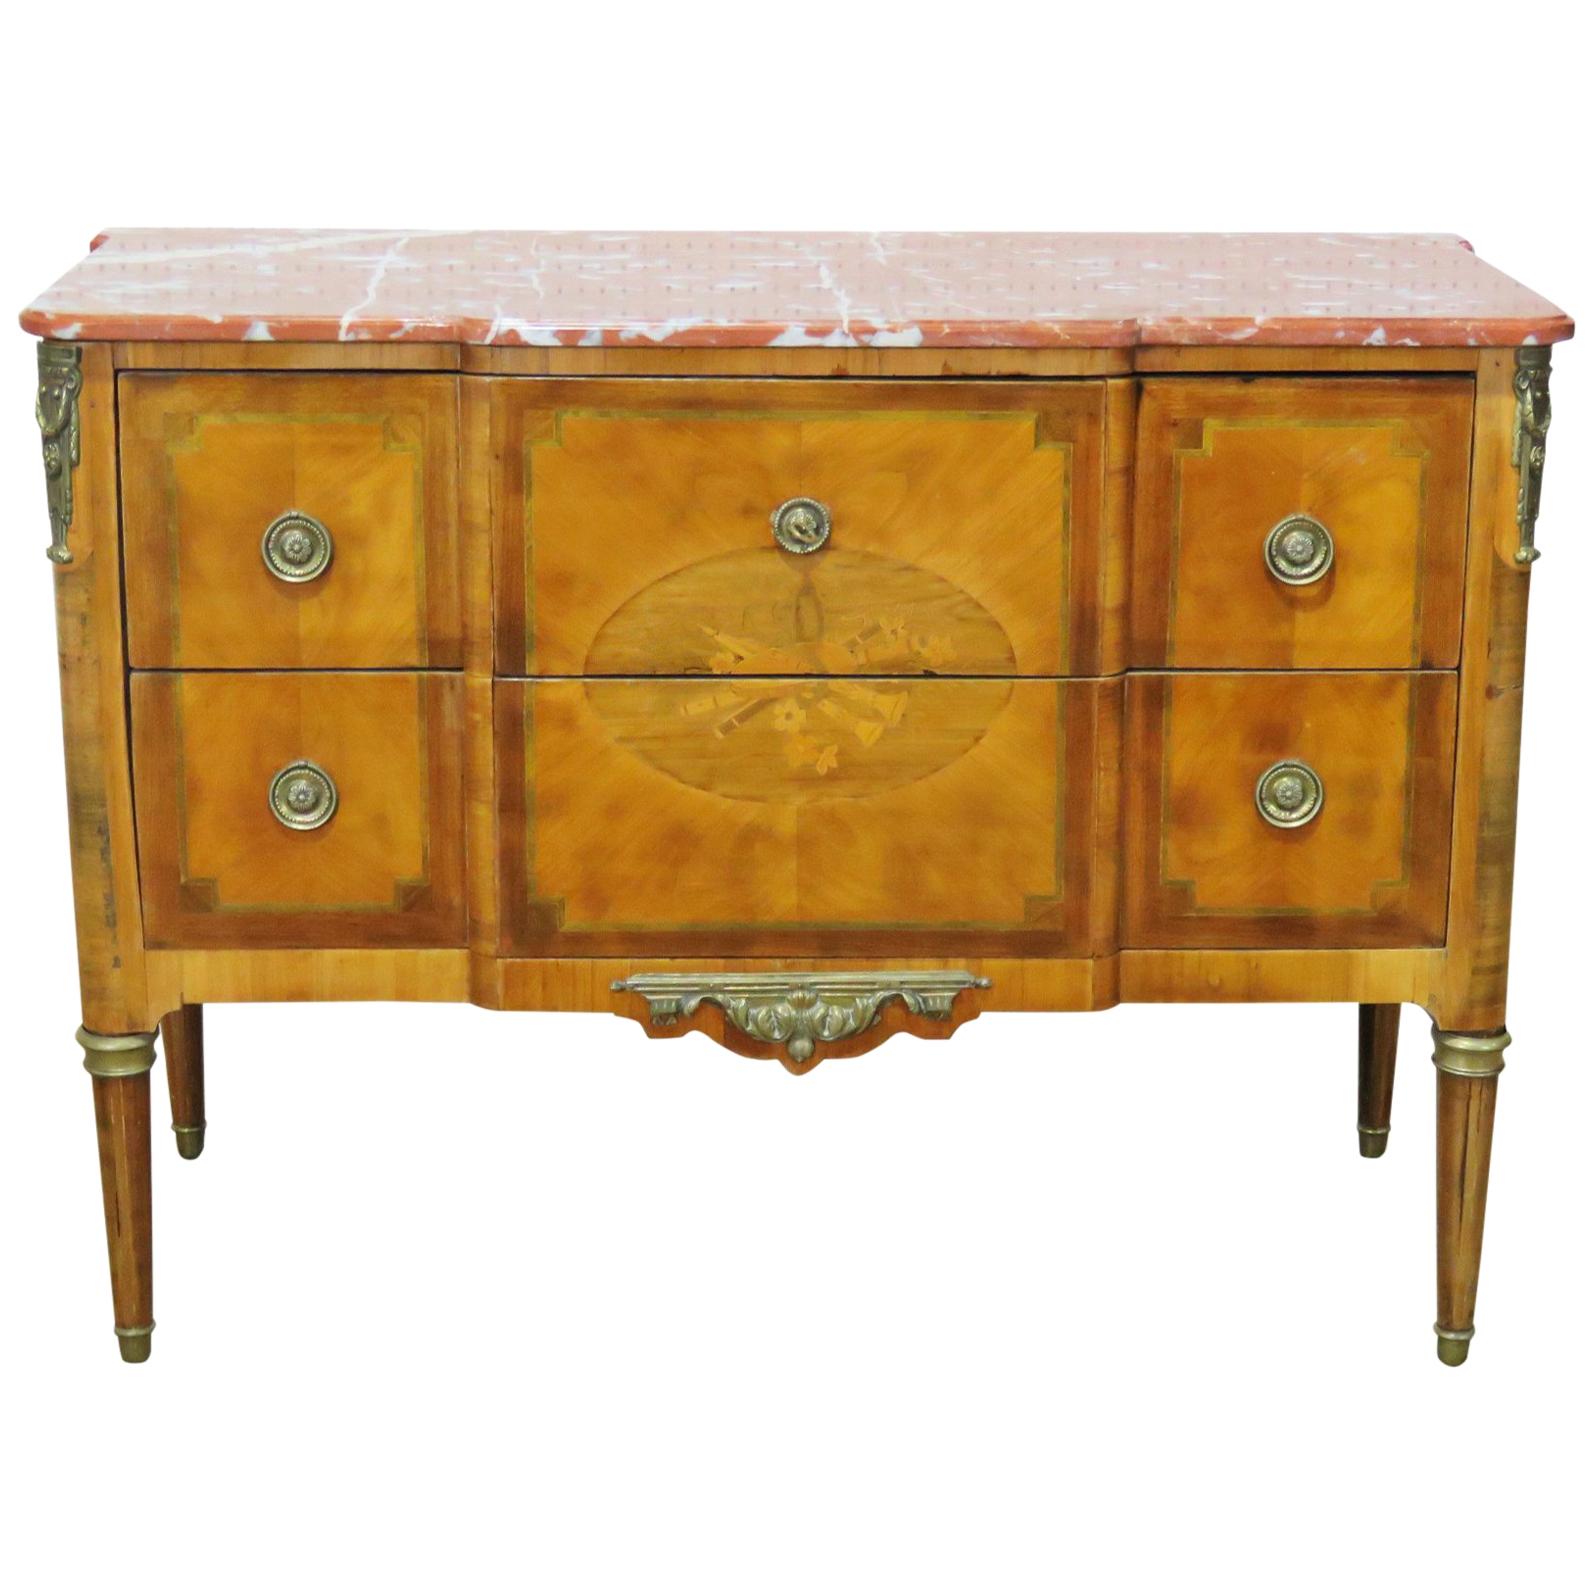 Antique Inlaid Satinwood Louis XV Rouge Marble Top Commode Dresser Foyer Chest